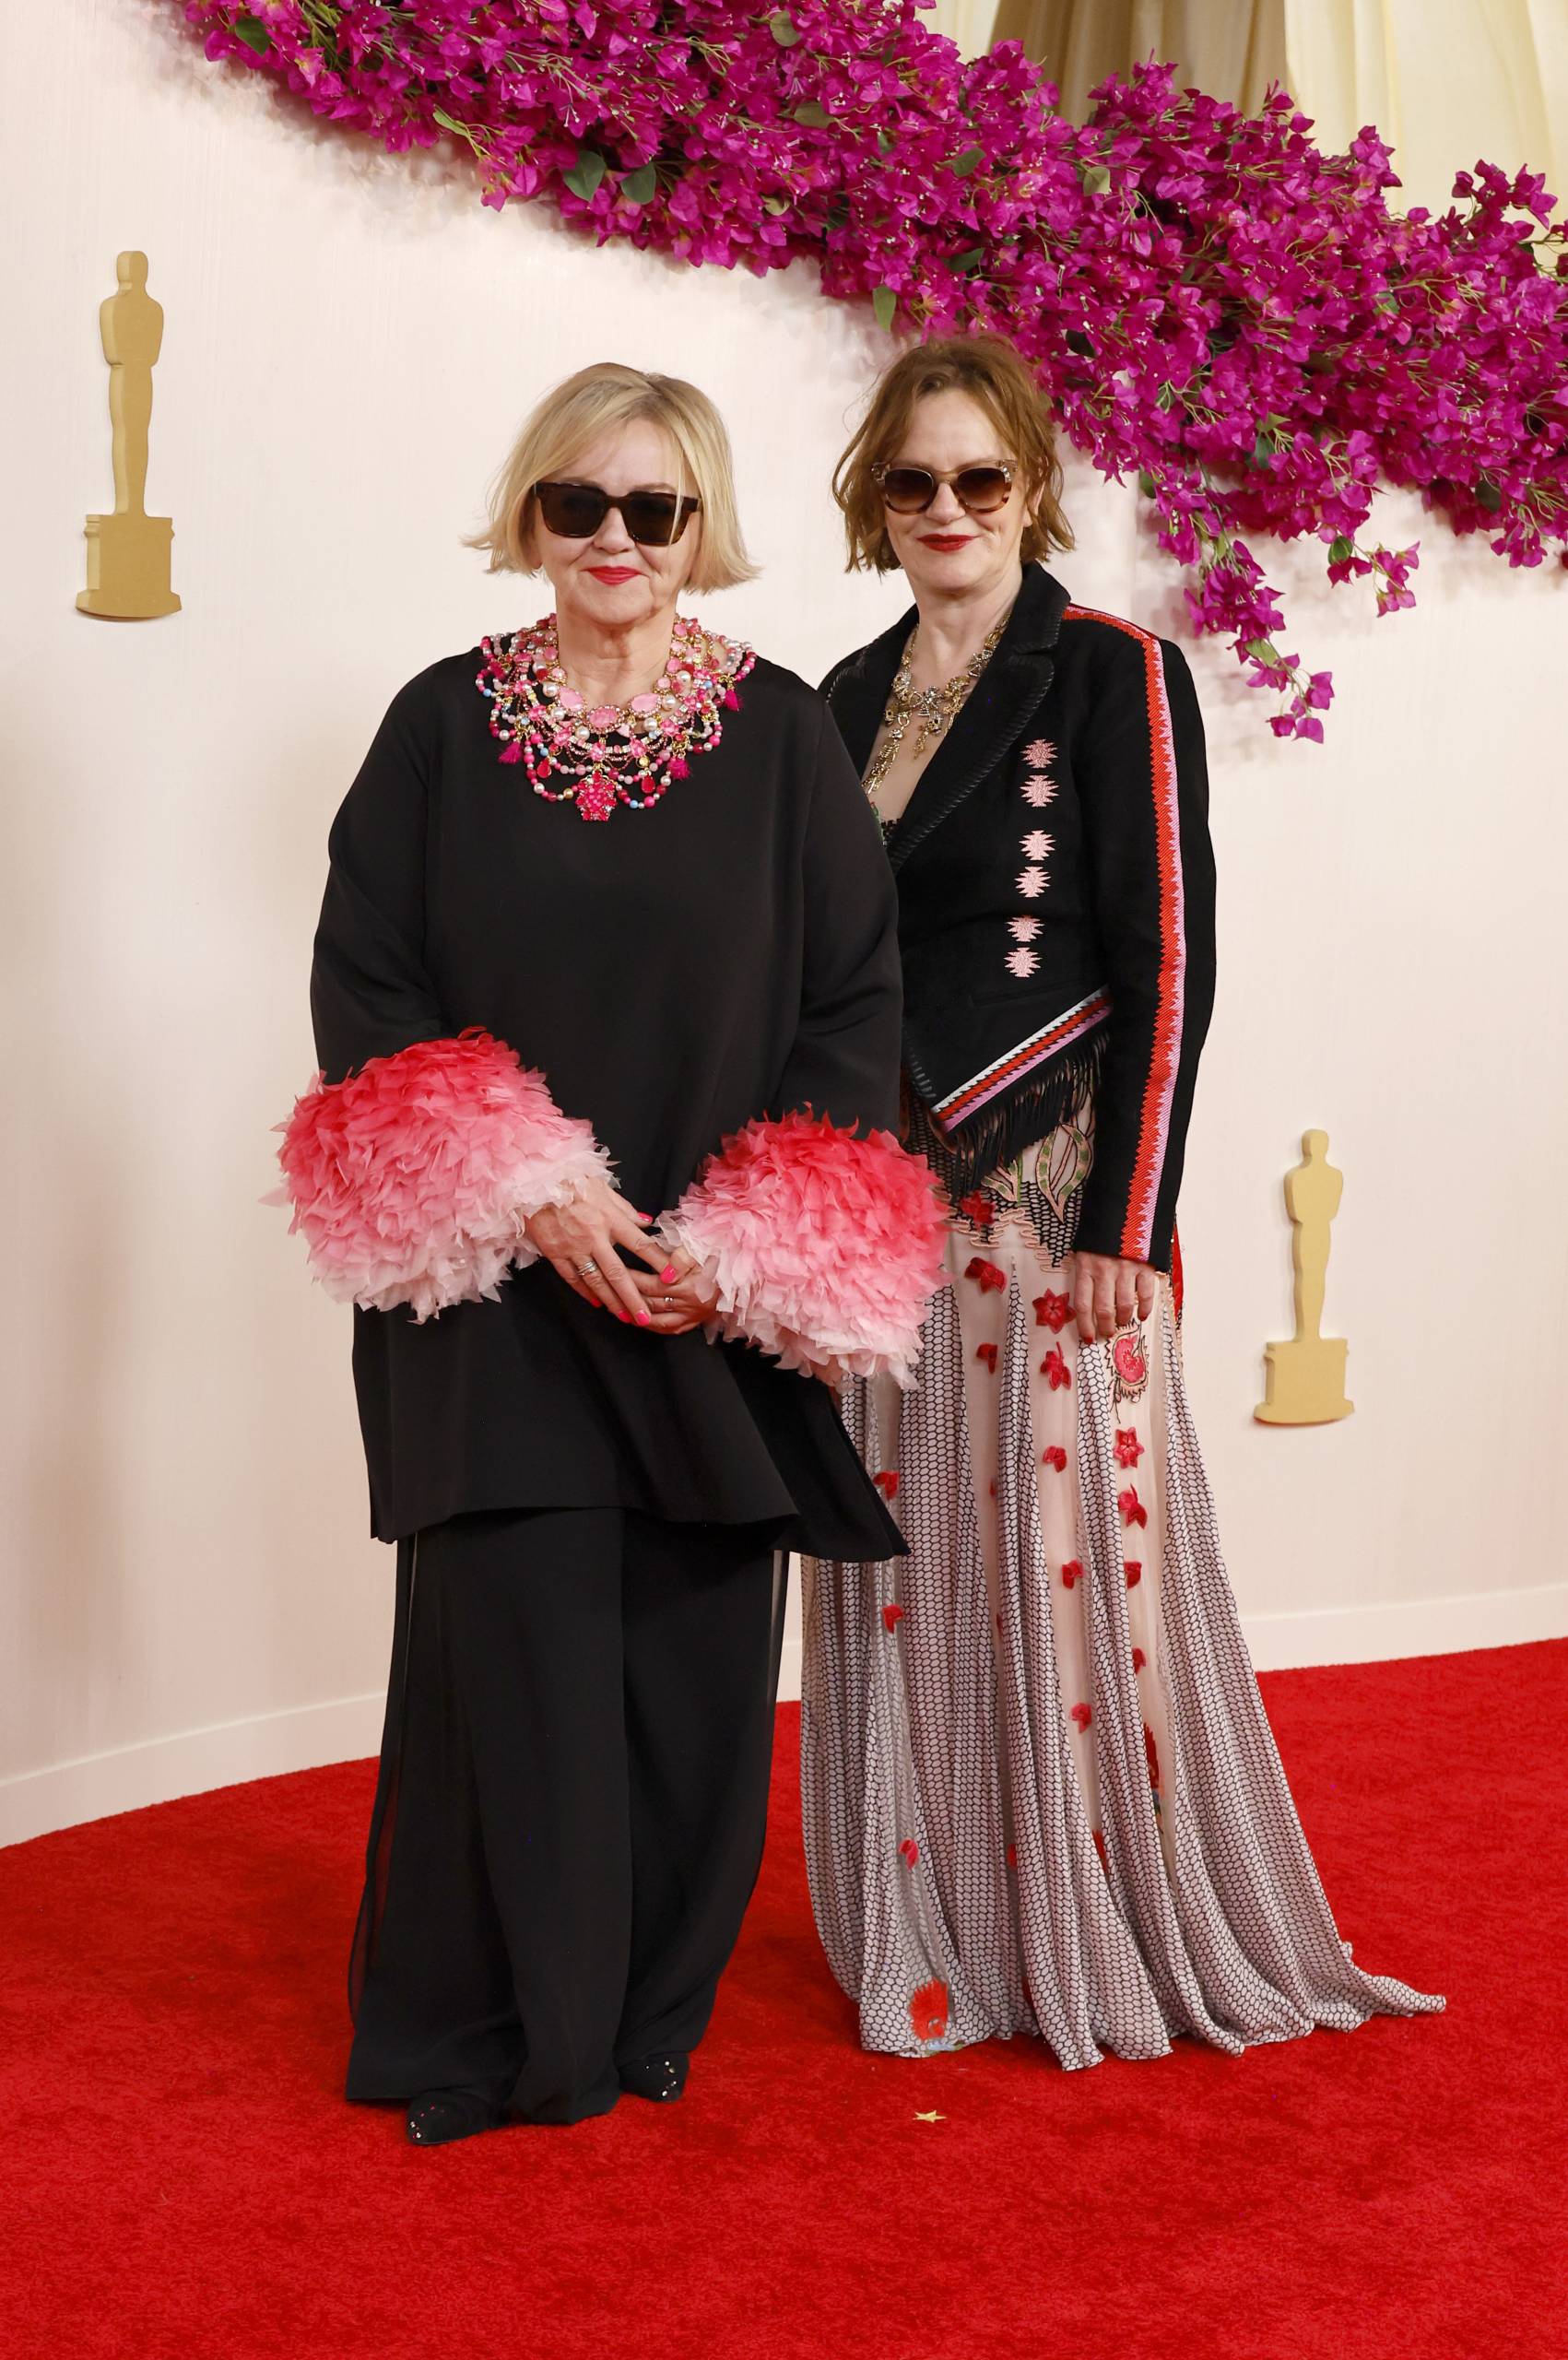 Two white women stand on a red carpet wearing sunglasses. One wears a Black suit with exaggerated pink cuffs. The other wears long floral skirt and military jacket.